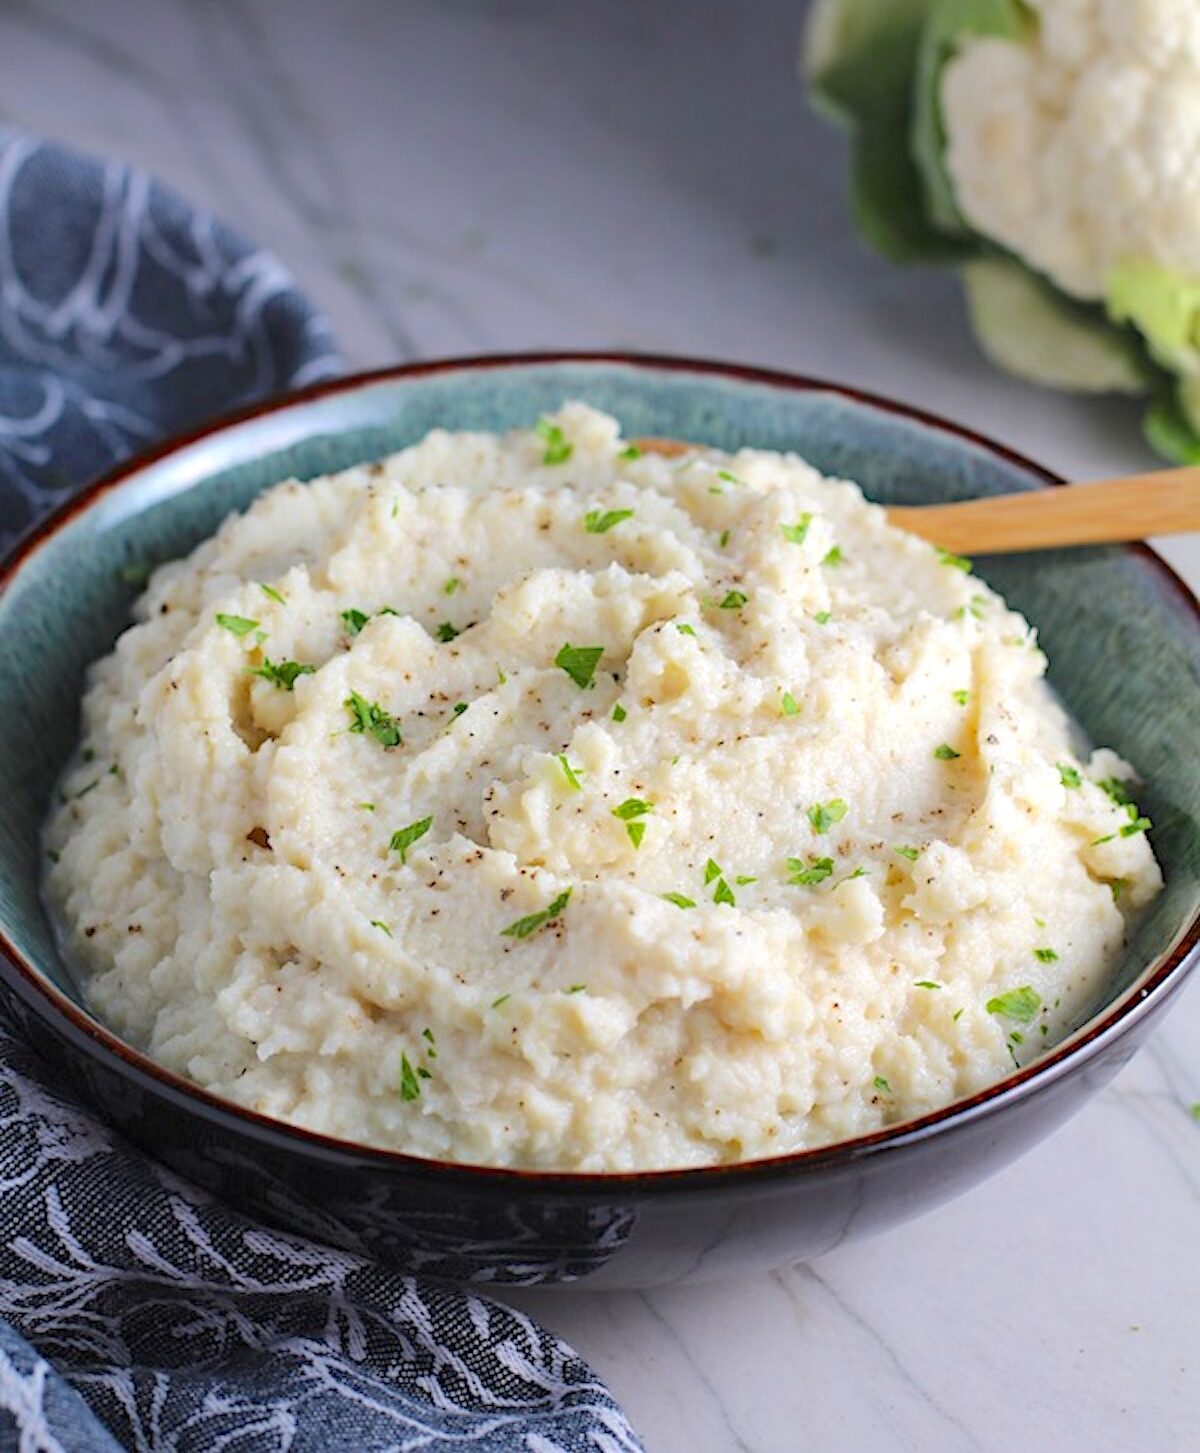 Mashed Roasted Cauliflower in a bowl with spoon. The texture is perfectly creamy and along with the flavor, mimics mashed potatoes.